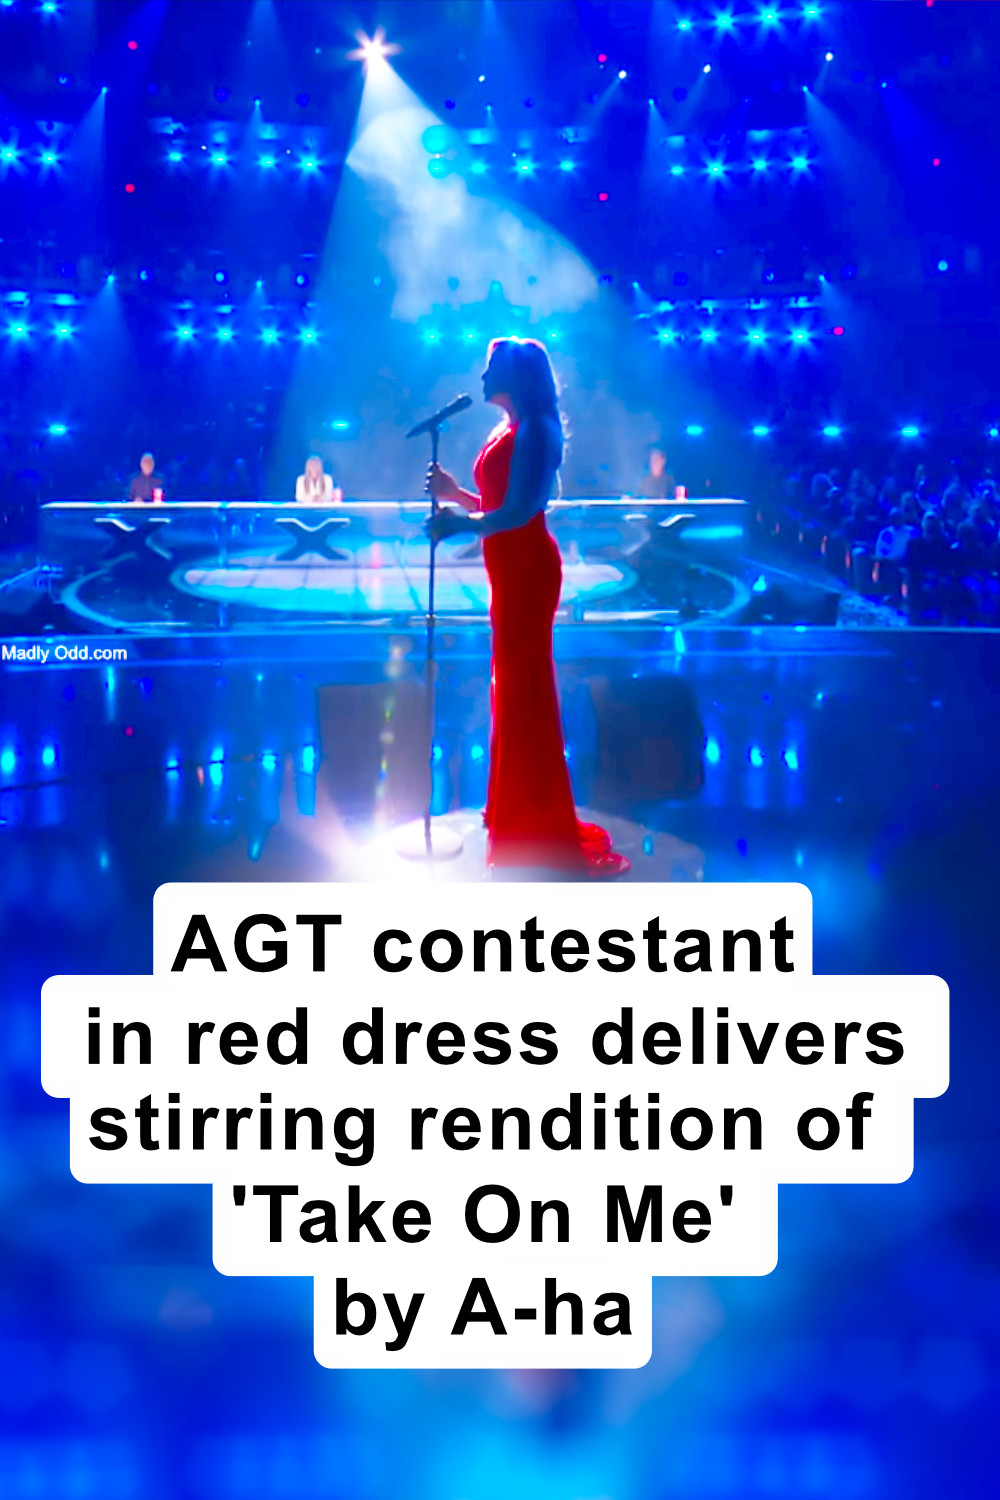 Woman in red dress delivers jaw-dropping rendition of \'Take On Me\' by A-ha